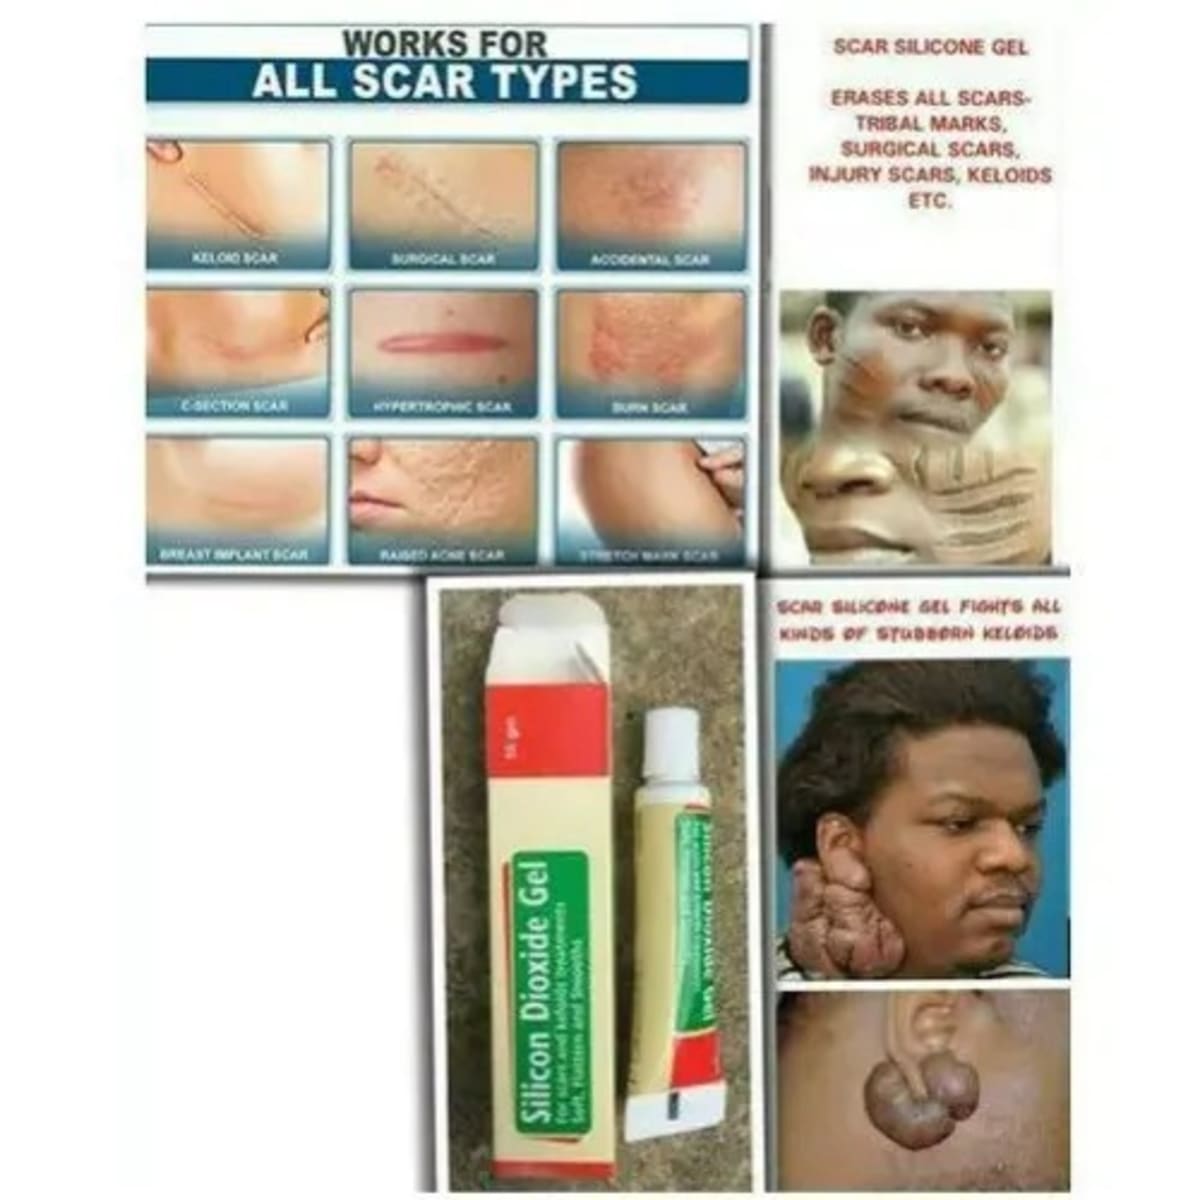 Silicone Gel For Scars Tribal Marks - 10g